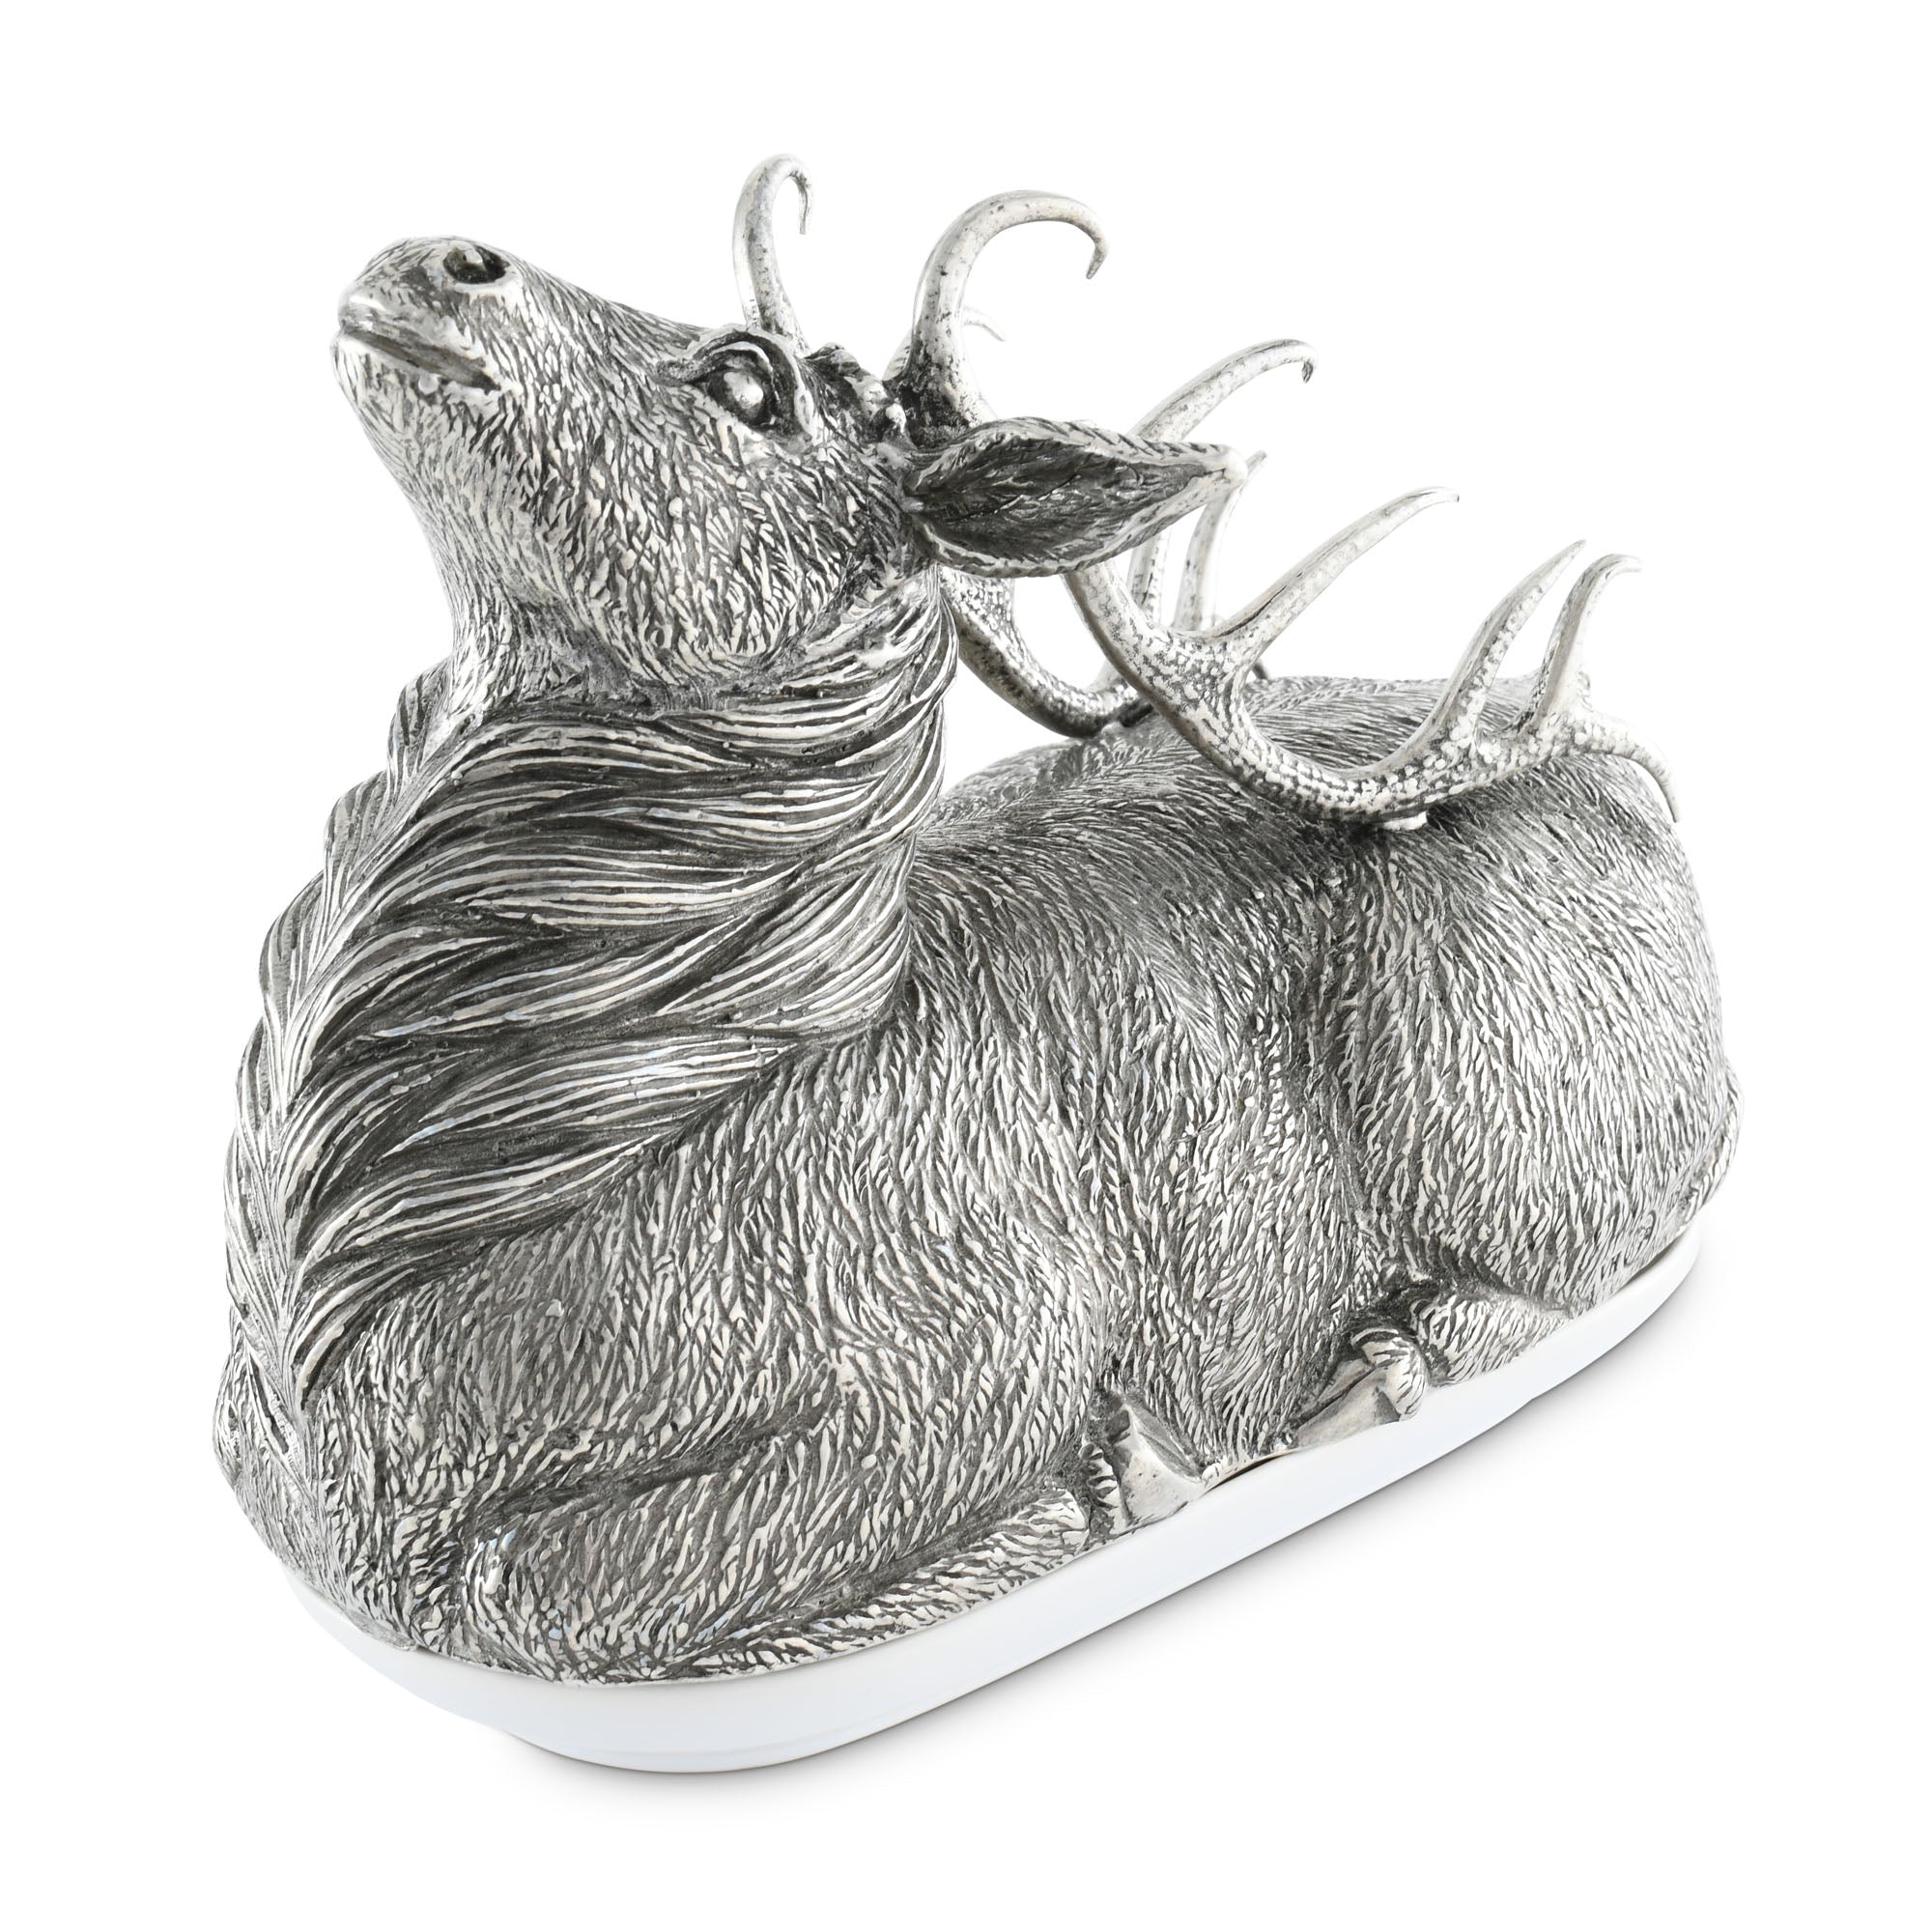 Vagabond House Pewter Stag Butter Dish Product Image